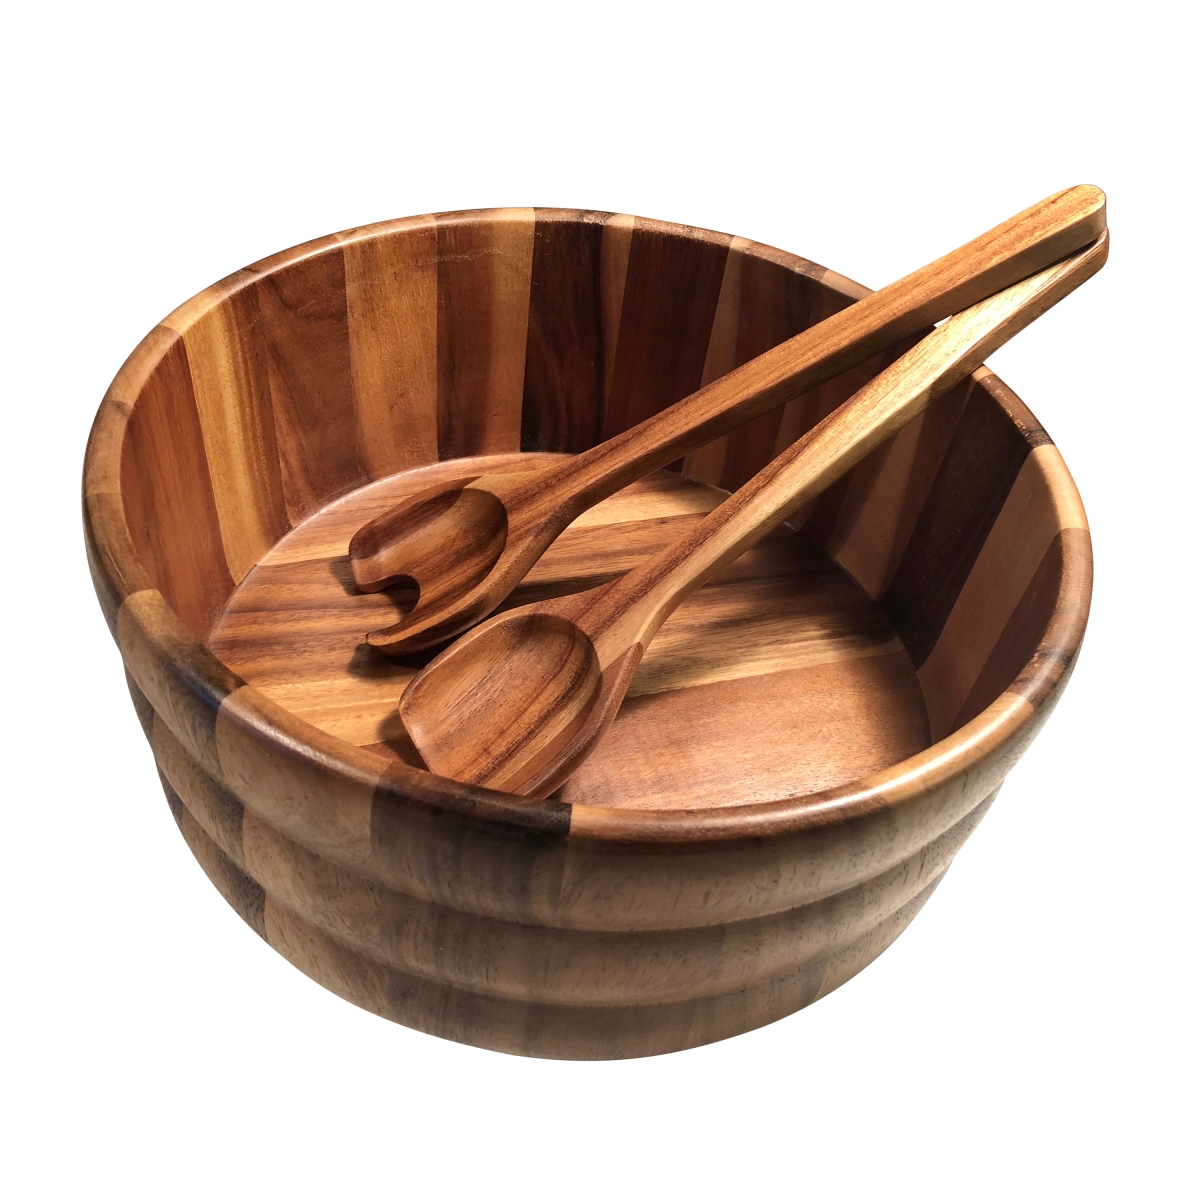 330c-3 5 In. Extra Large Salad Bowl With Servers - 3 Piece